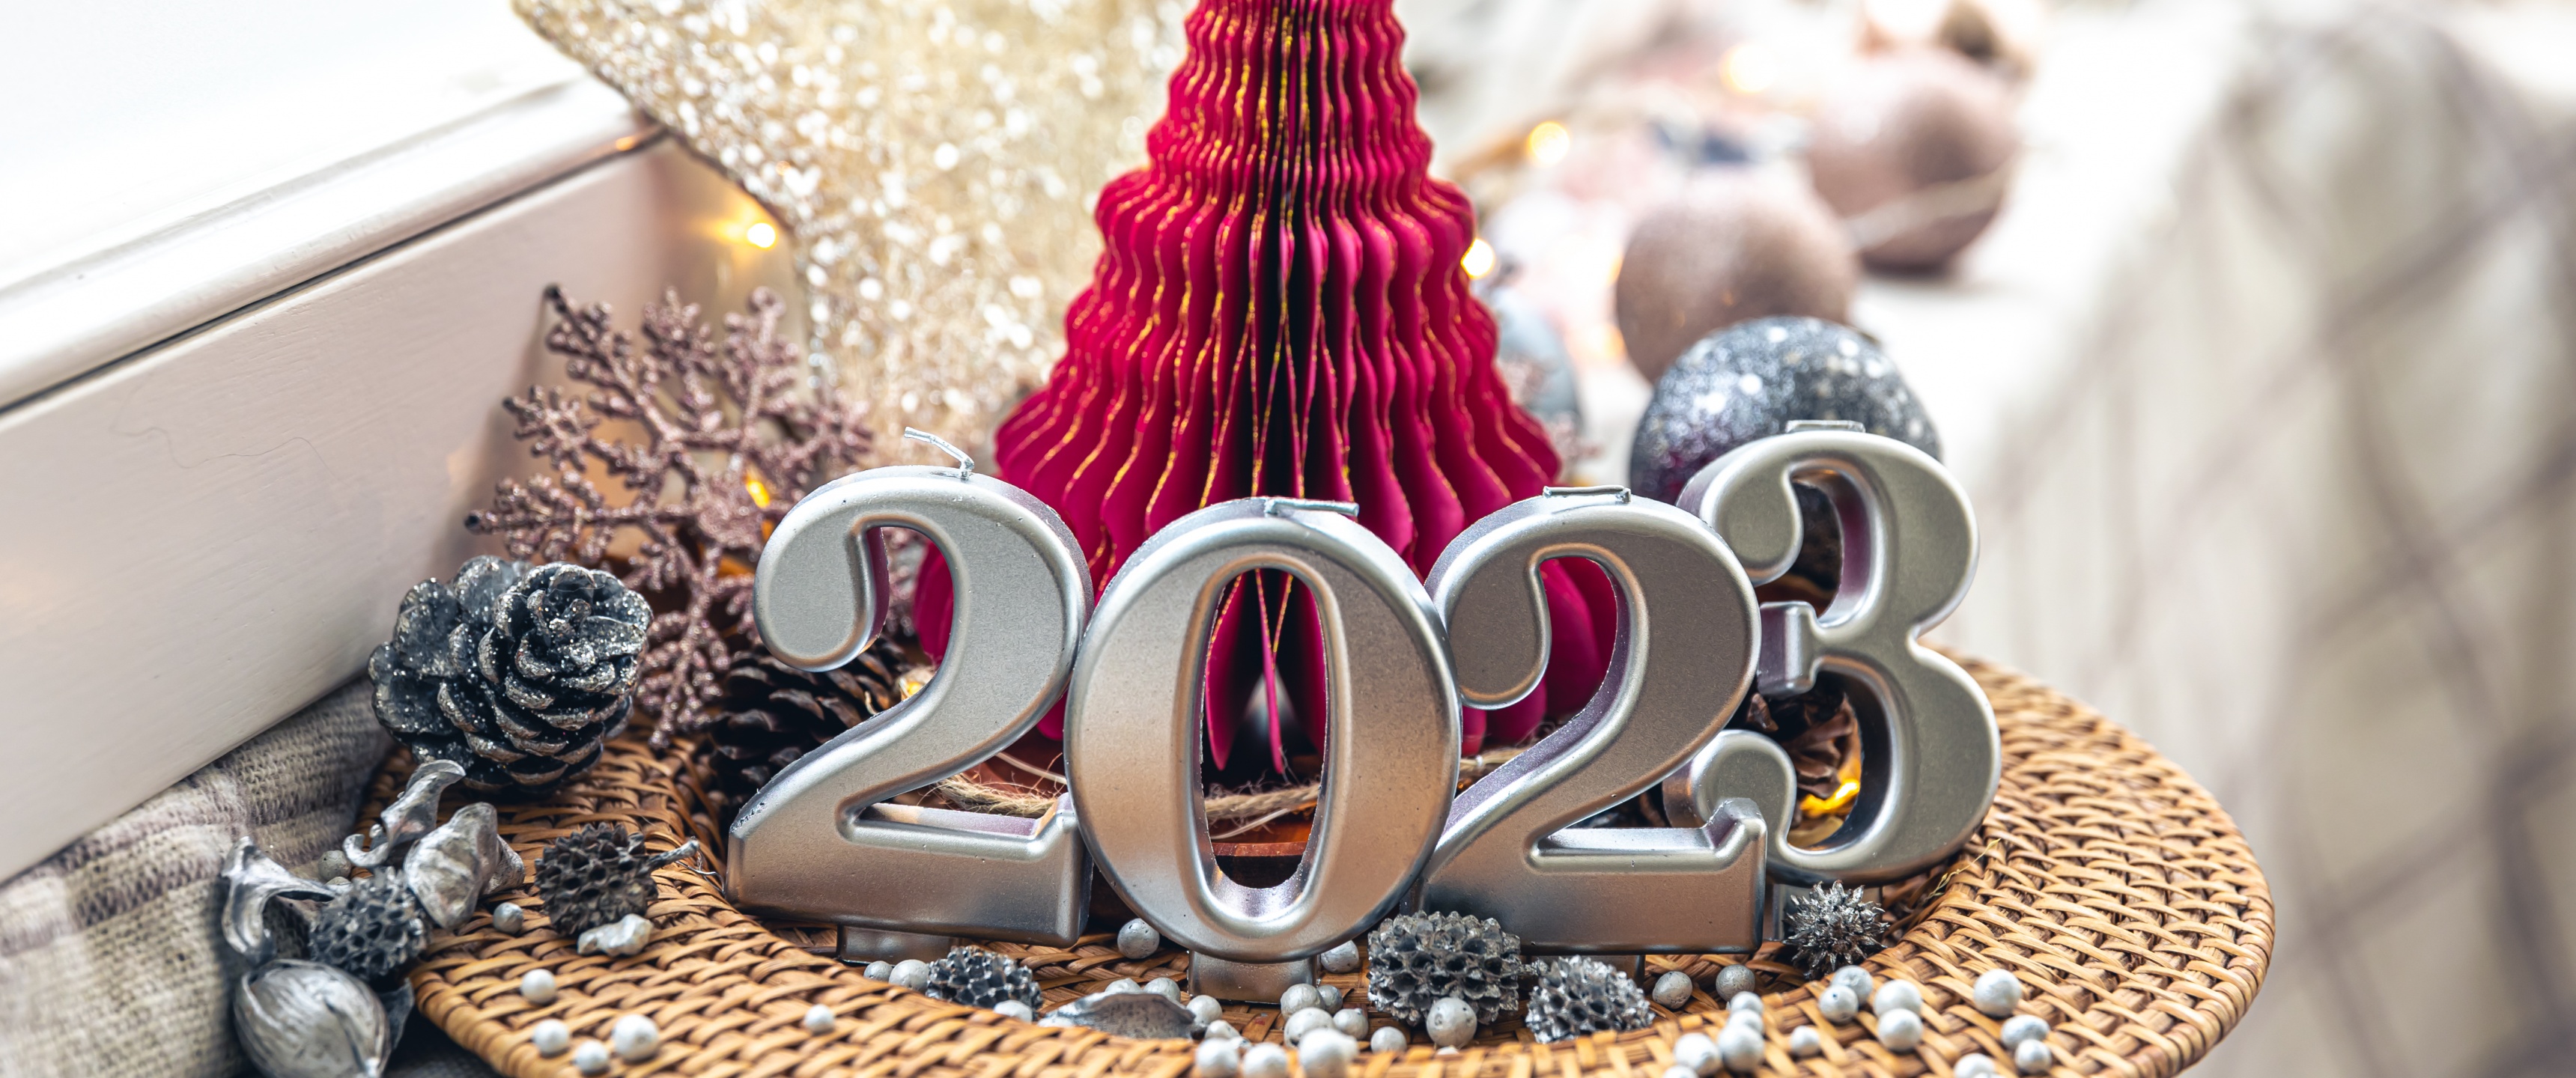 Let\'s welcome the brightest moments at the latest party. Capture the beautiful images and together create the most precious memory of this new year.)